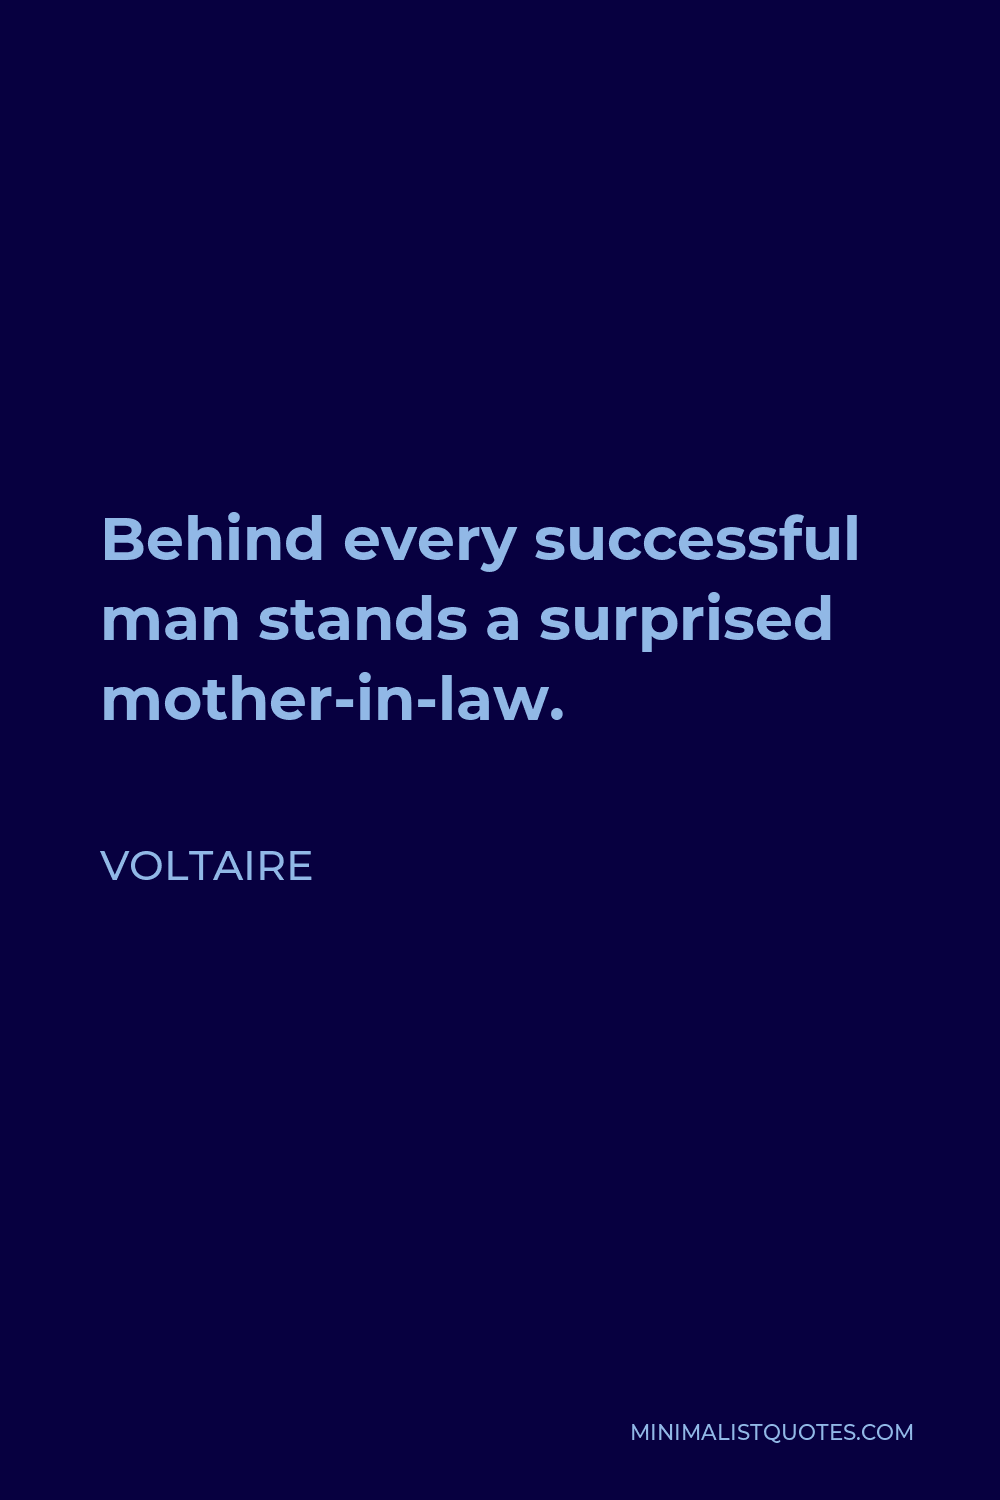 Voltaire Quote - Behind every successful man stands a surprised mother-in-law.